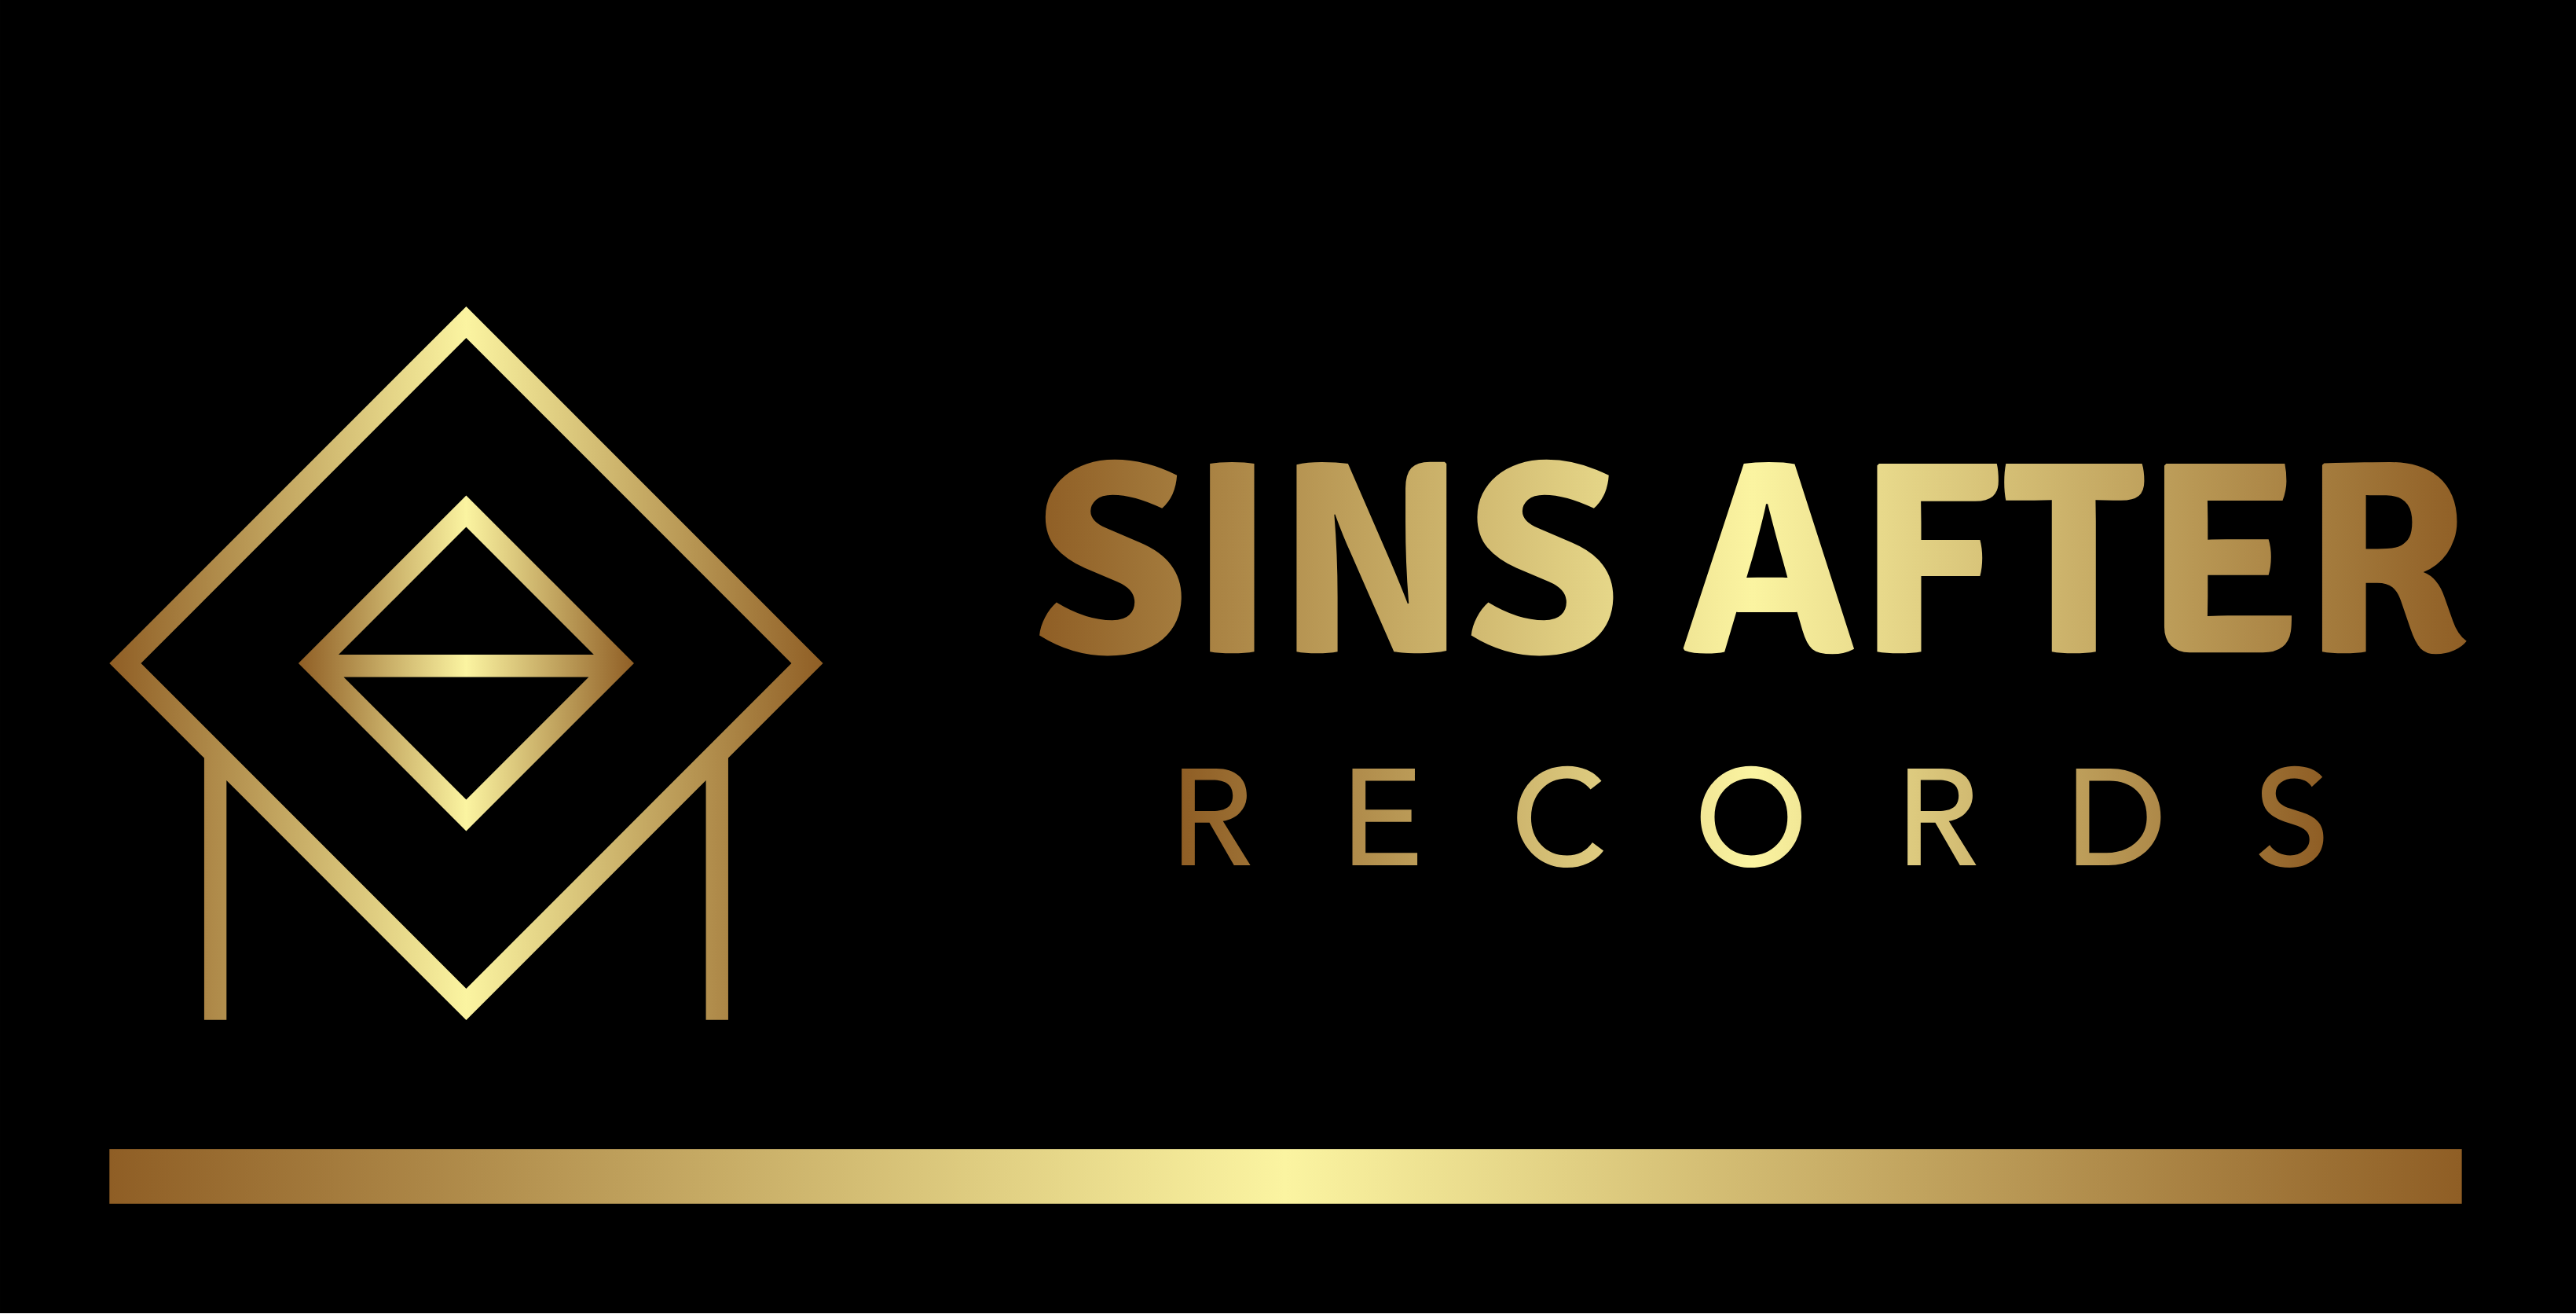 Sins After Records